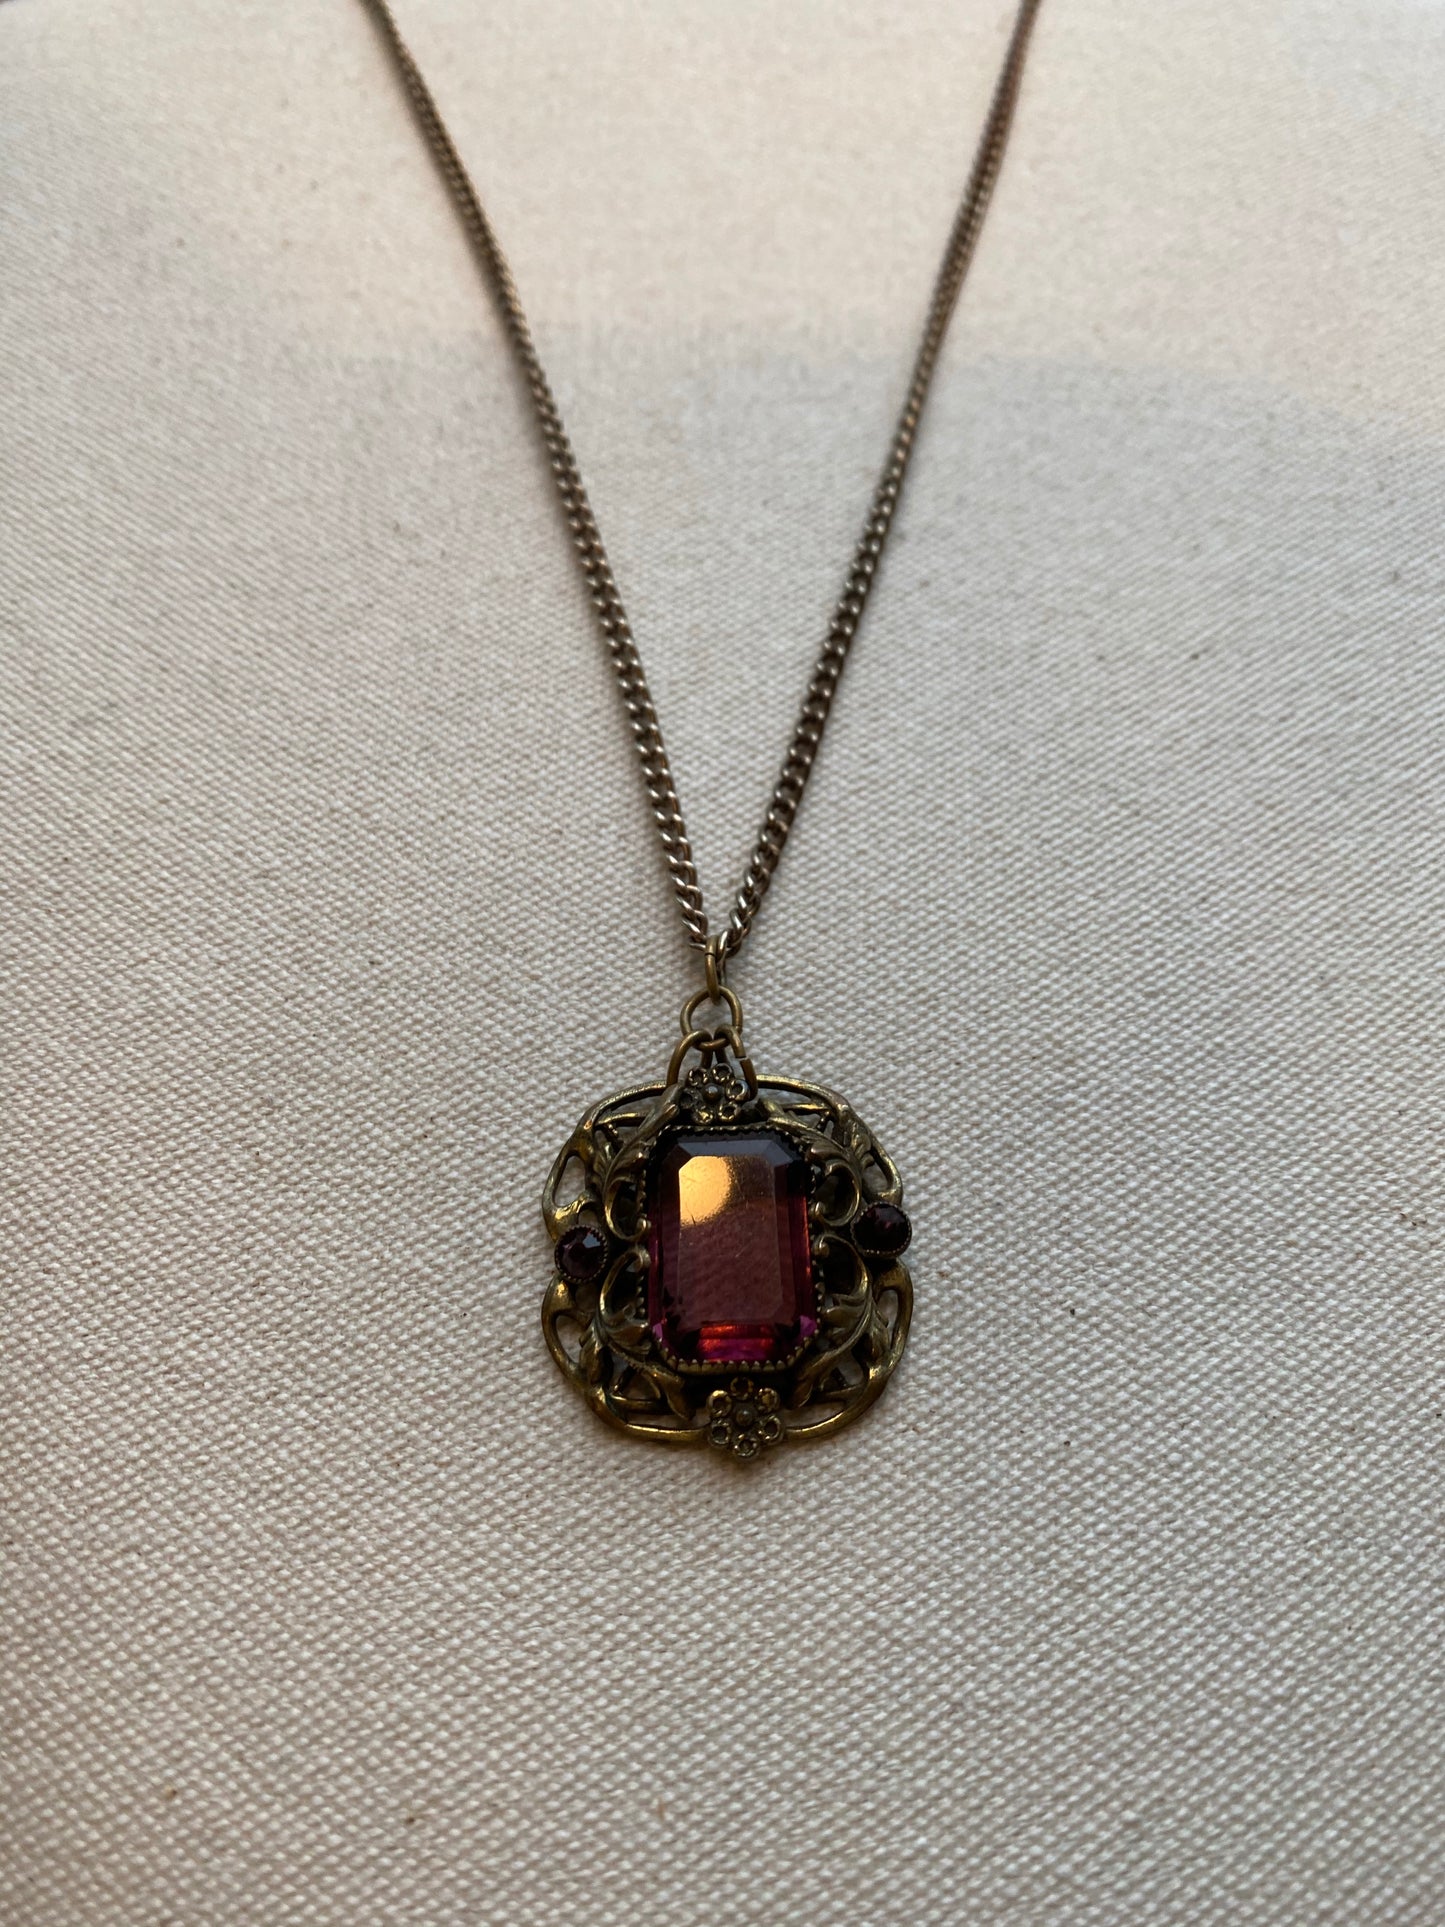 Clear Purple Stone Necklace, 1940's